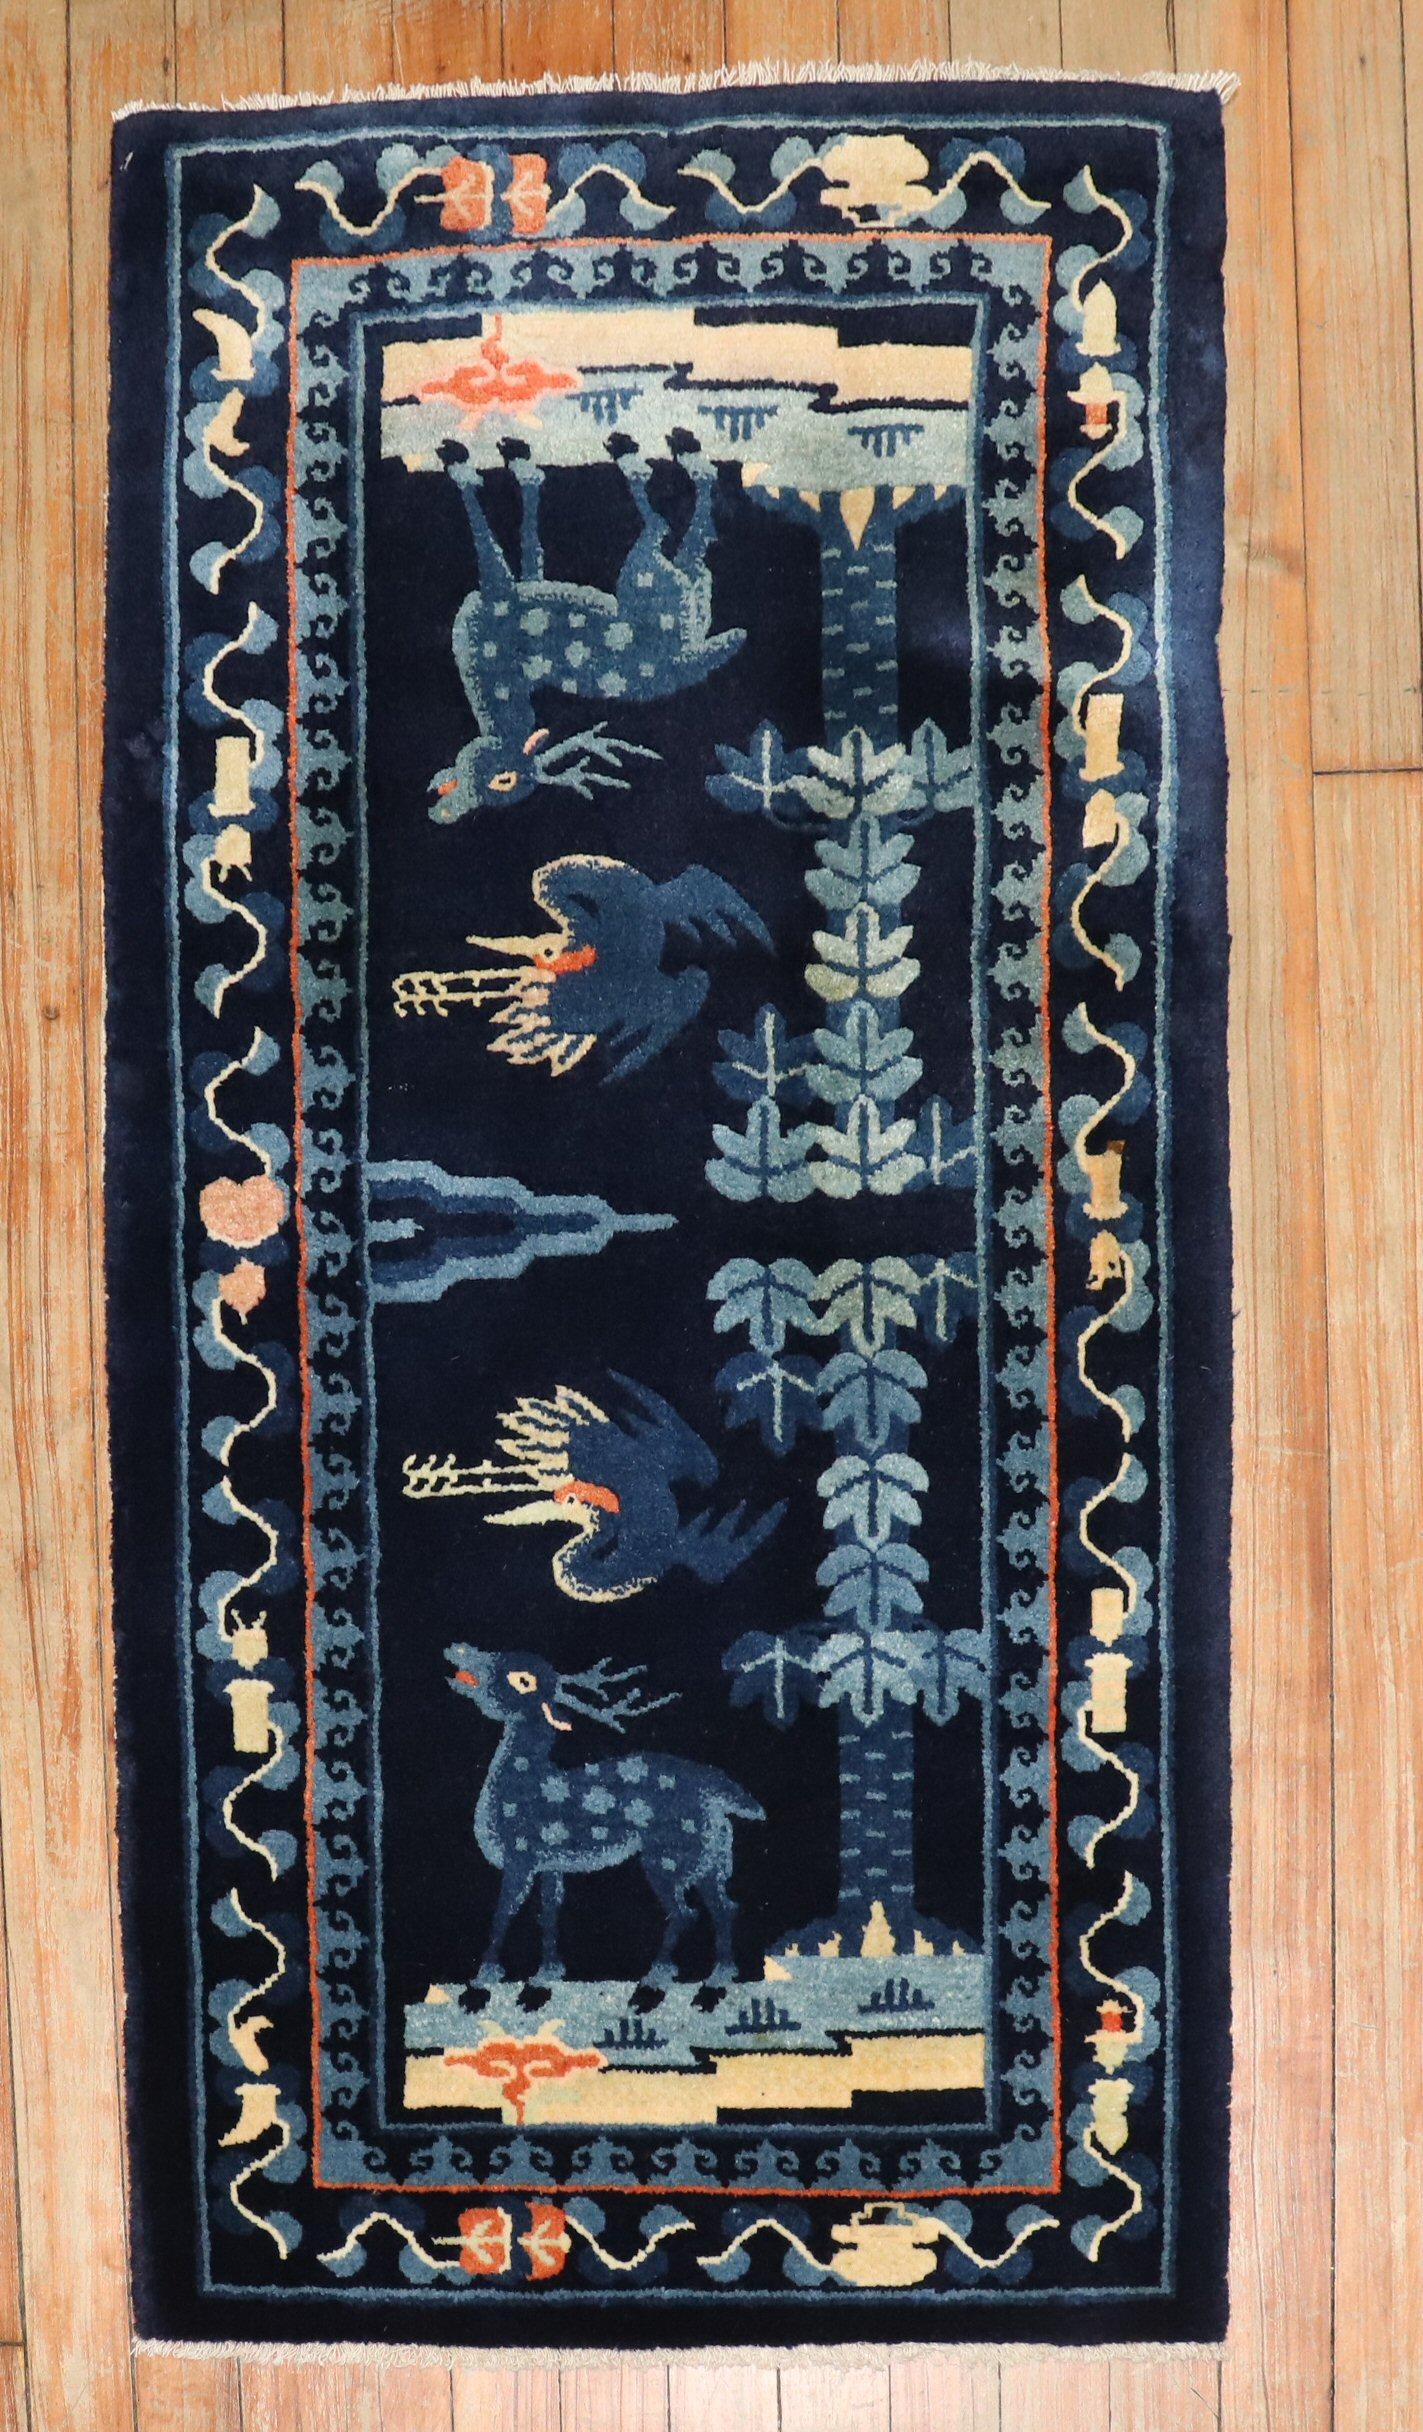 Scatter size Chinese Peking rug from the 2nd quarter of the 20th century with an animal pictorial motif

Measures: 1'11